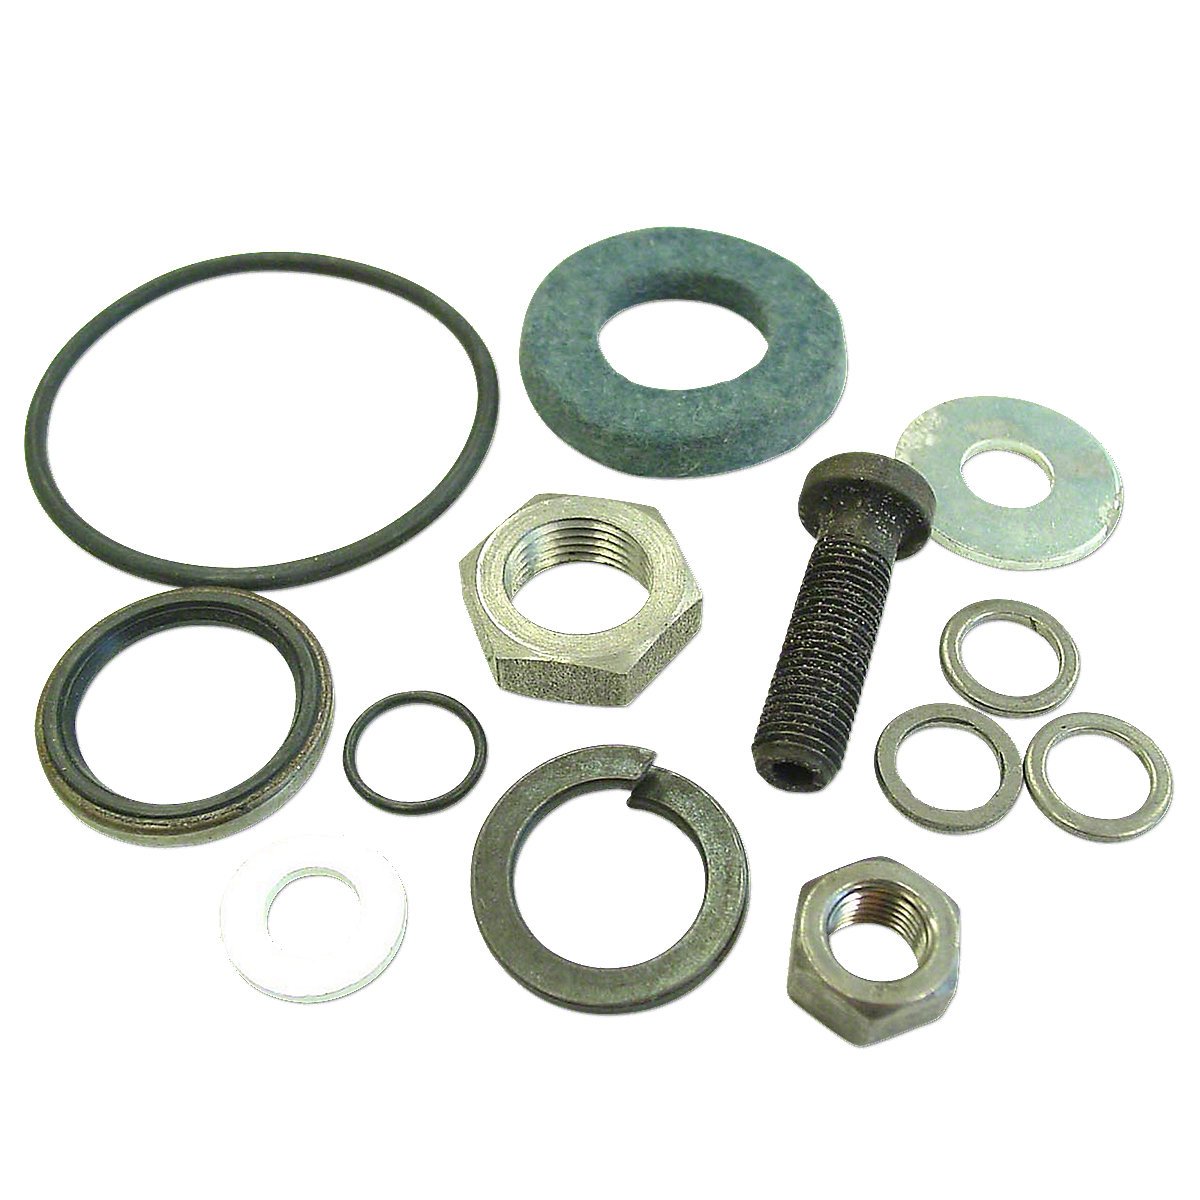 Steering Sector Hardware And Seal Kit For Massey Ferguson: TO35, 135, 35.